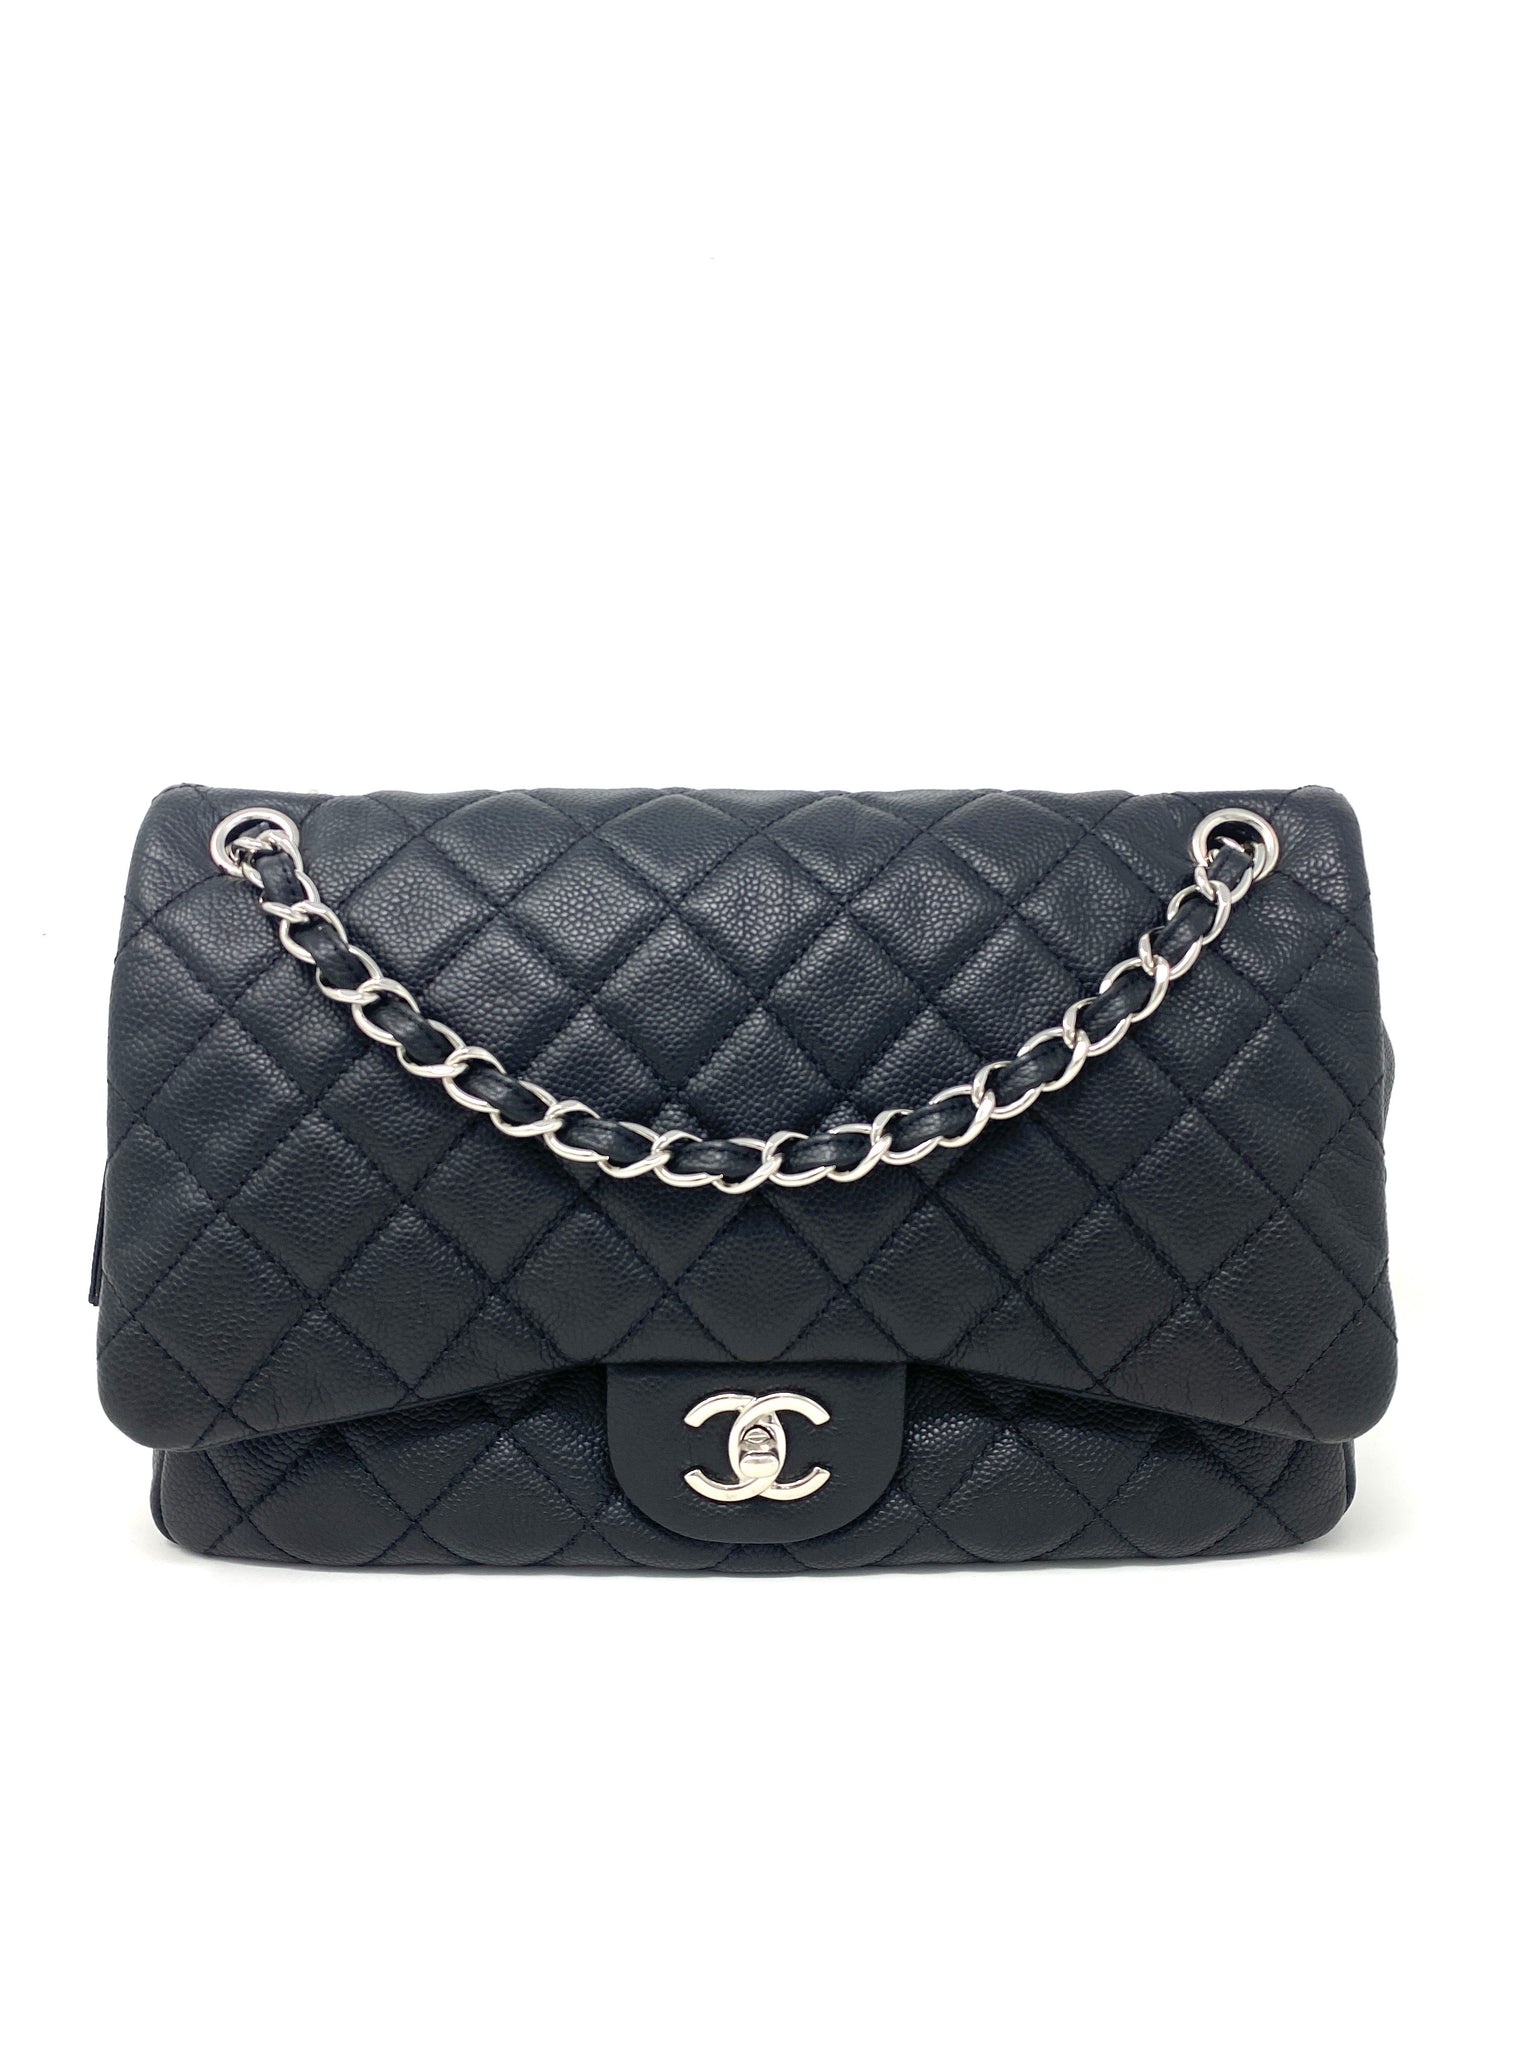 Chanel Underline Saddle Flap Bag Quilted Calfskin Small